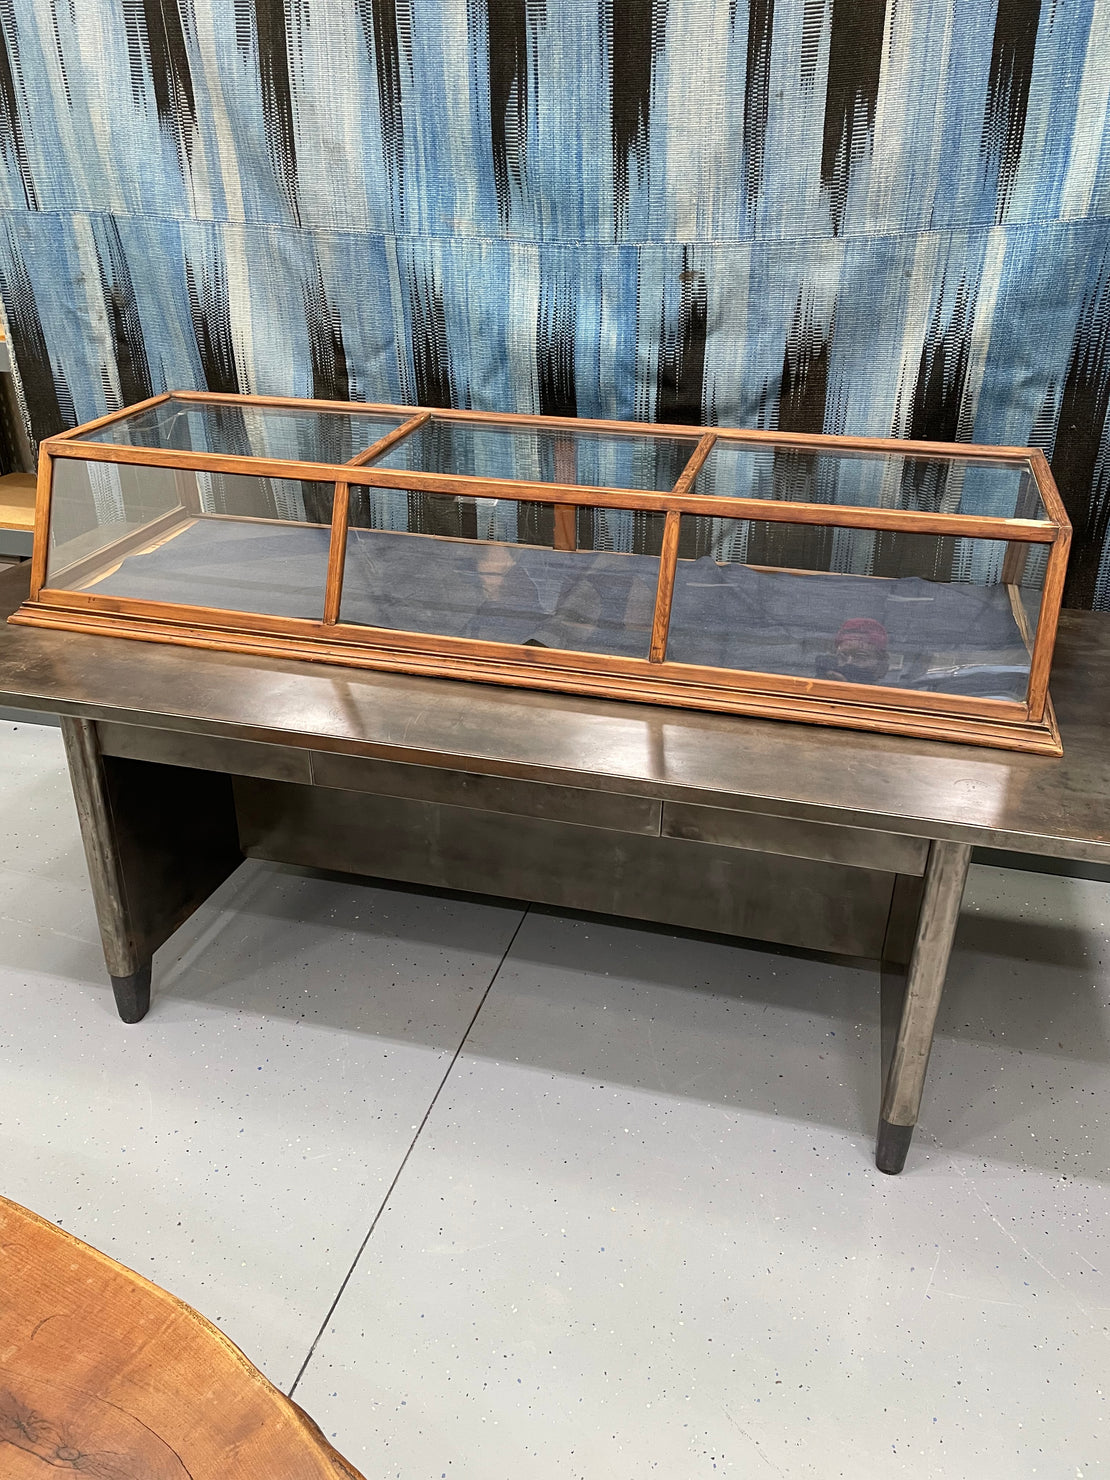 Warehouse Sale A2 - 6 Panel Counter Top Glass Display